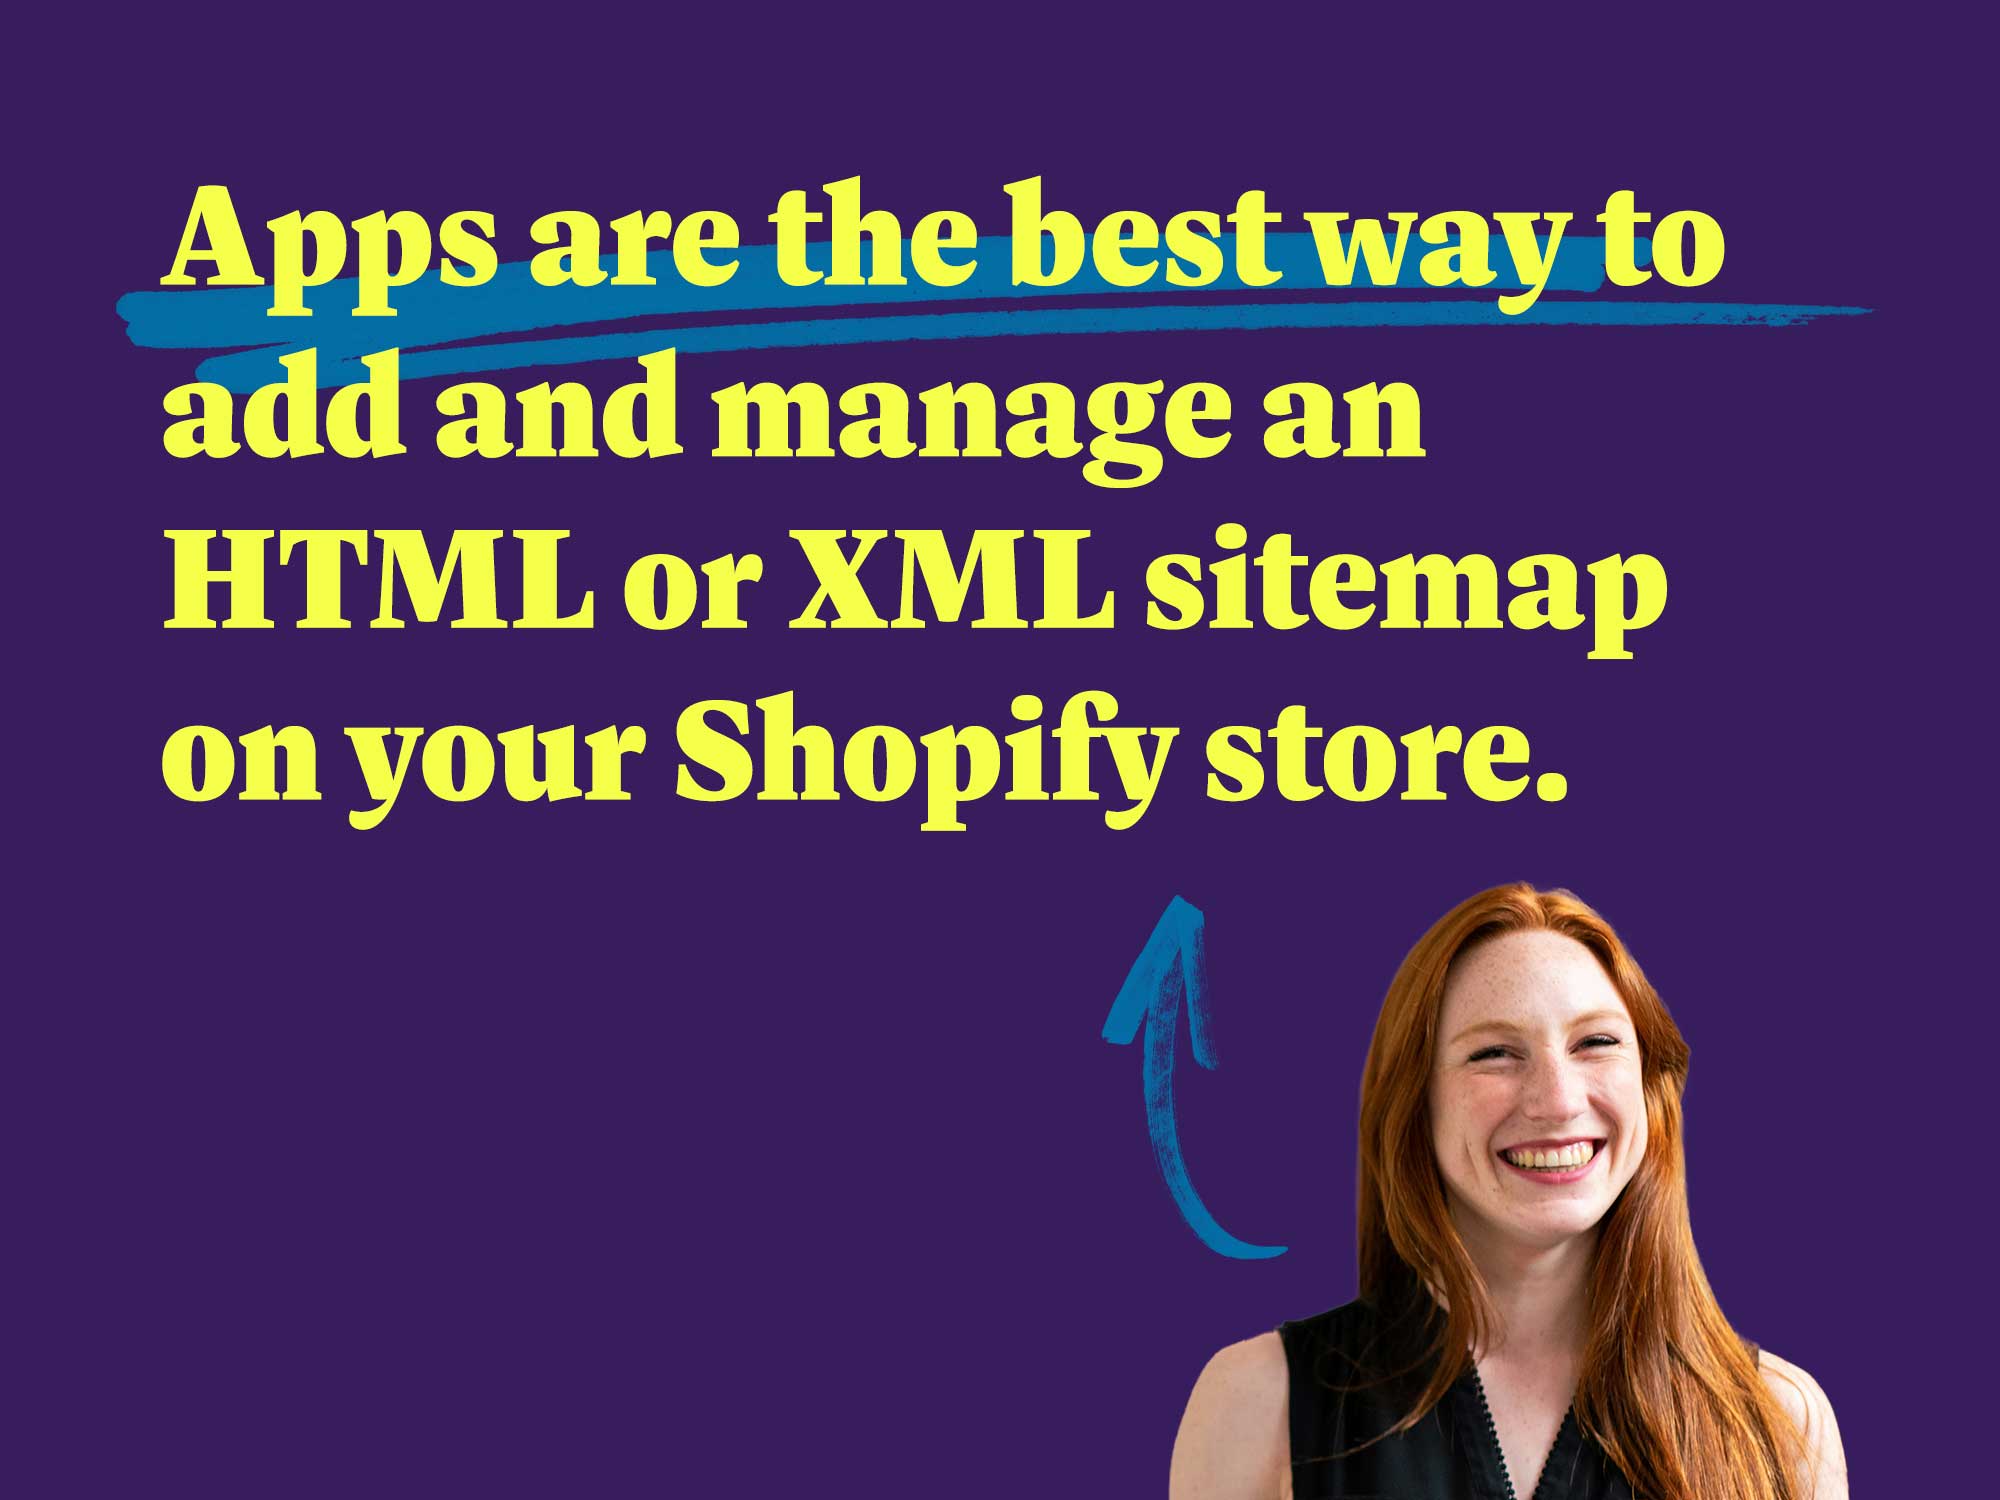 Apps are the best way to add and manage an HTML or XML sitemap on your Shopify store. 